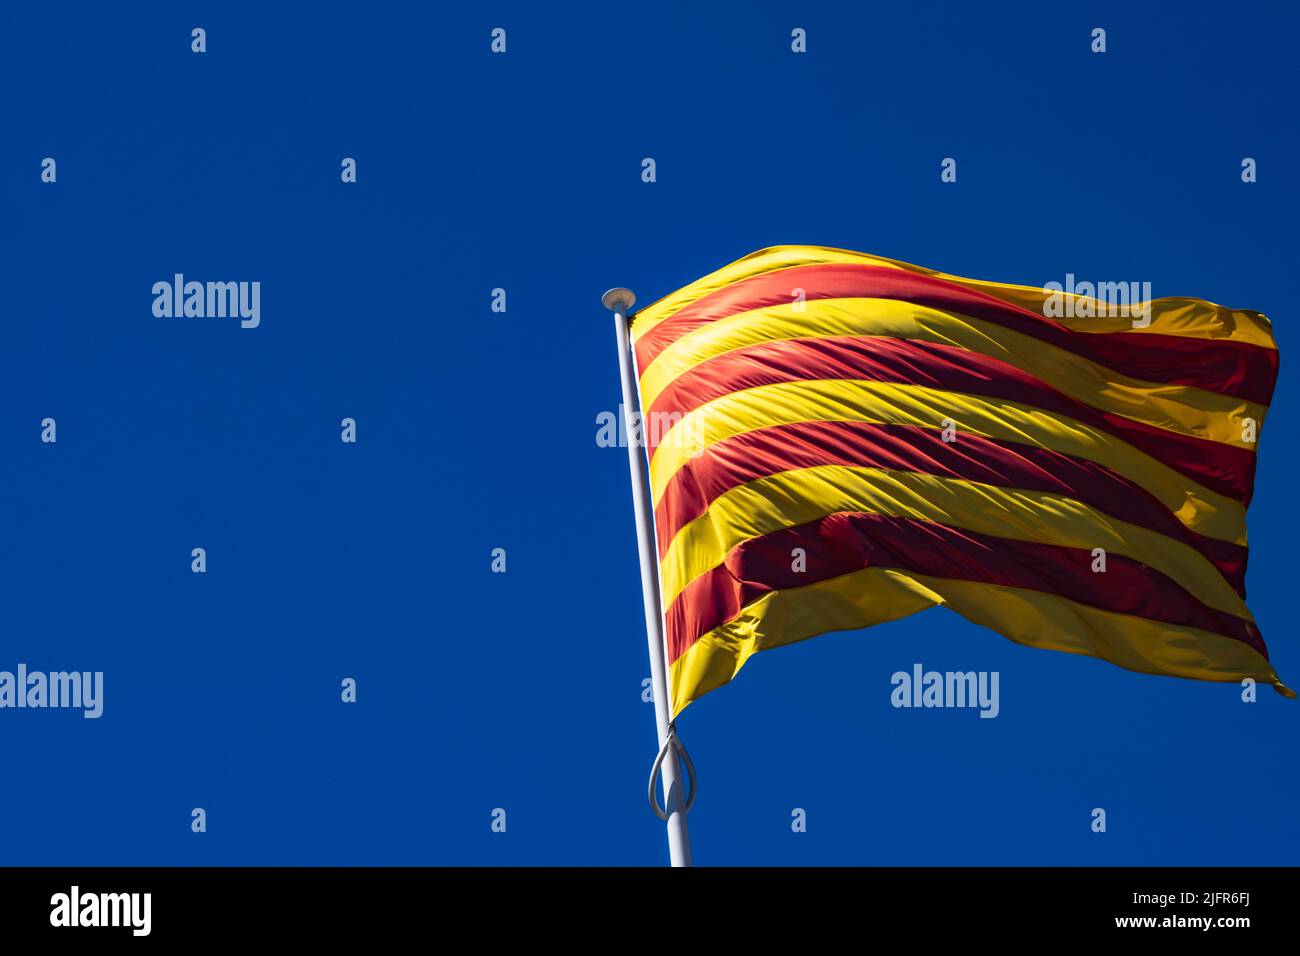 The flag of Catalonia (Spain) fluttering in the wind. On the left side of the image is a large area of negative space created by the blue sky. Stock Photo